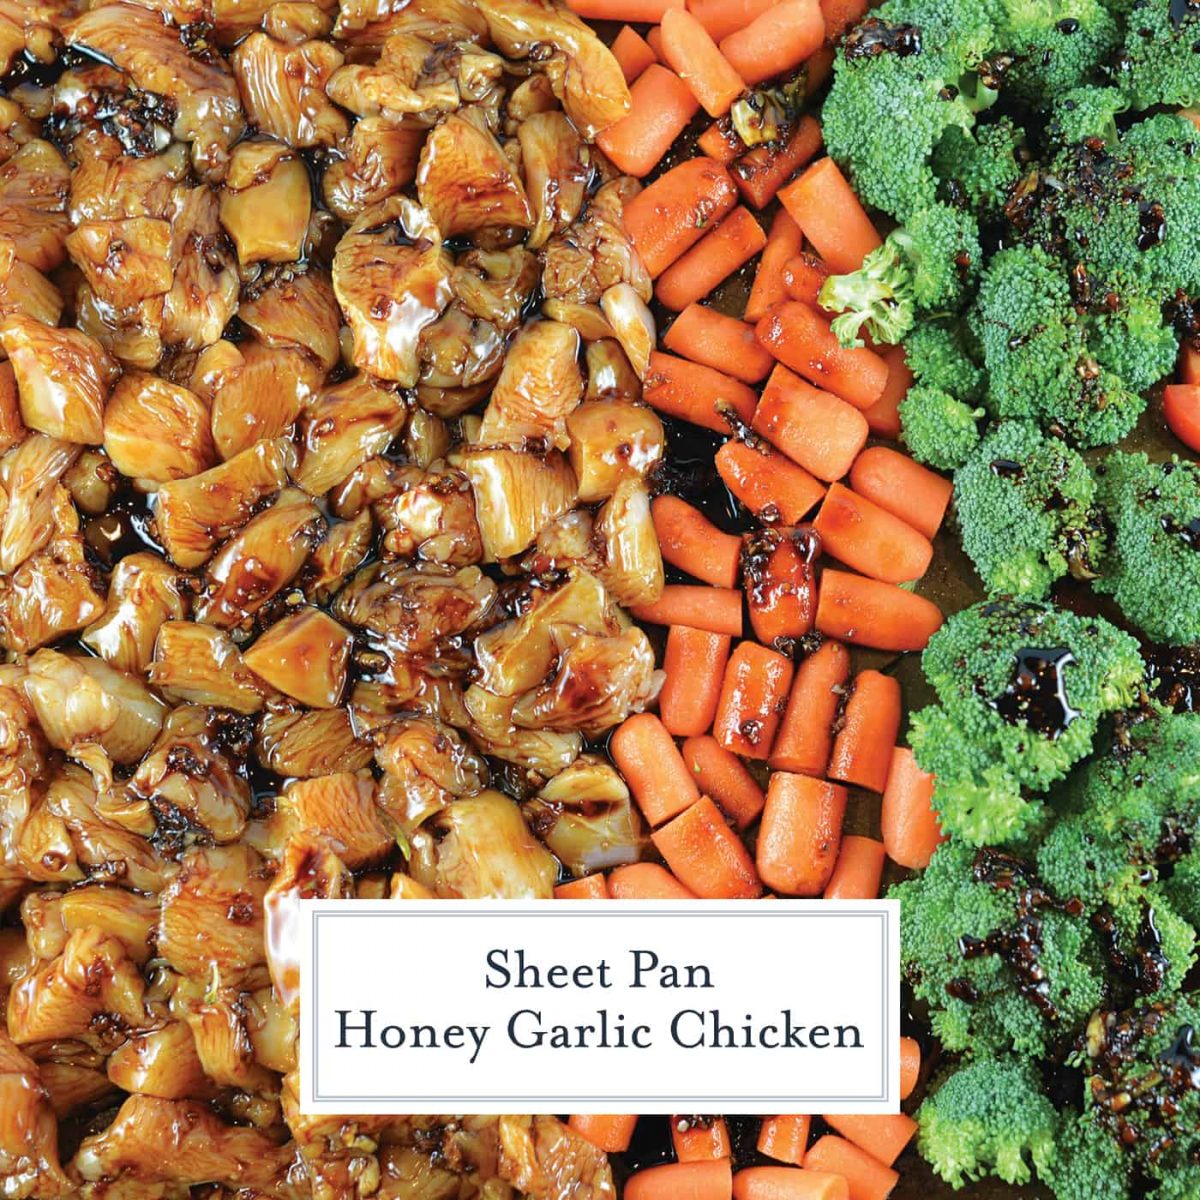 Sheet Pan Honey Garlic Chicken is an easy sheet pan dinner that's packed with flavor. An easy chicken recipe ready in just 30 minutes. #sheetpanmeals #honeygarlicchicken #easychickenrecipe www.savoryexperiments.com